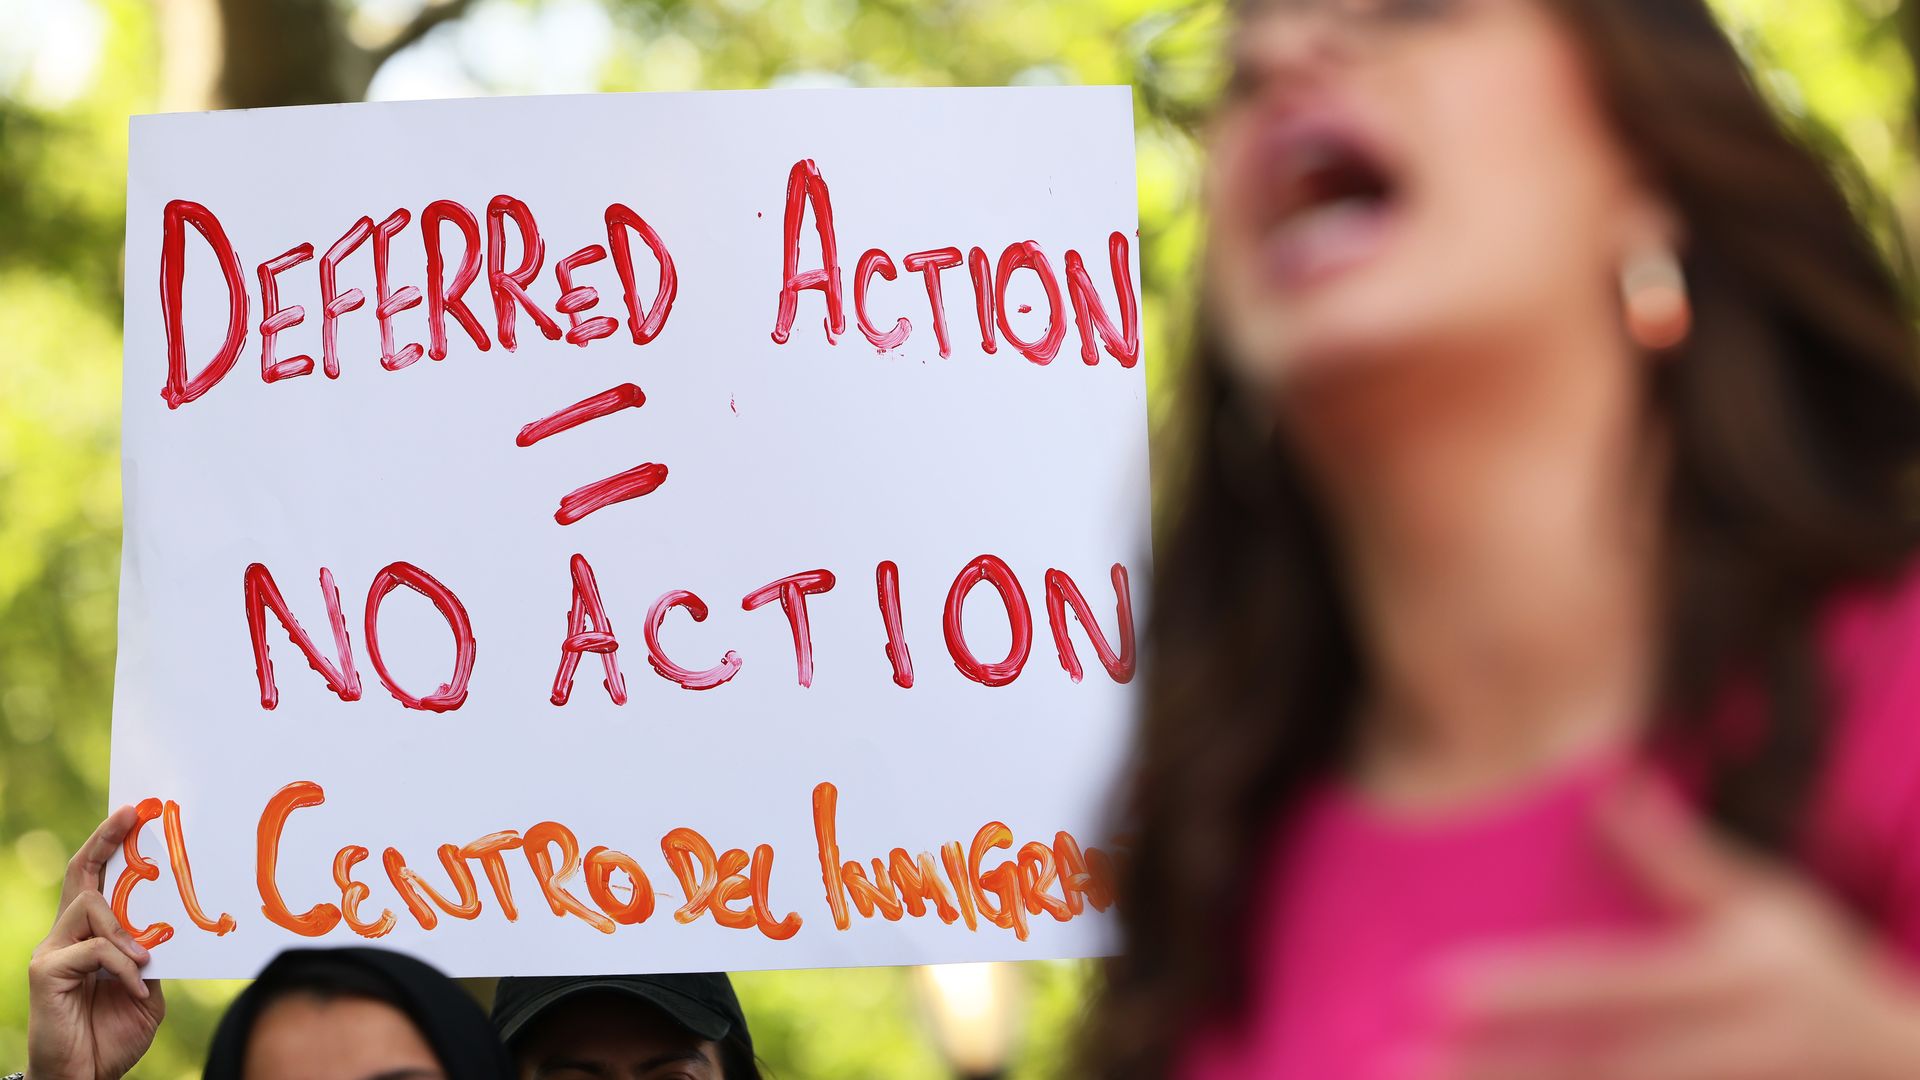 Photo of a sign that says "Deferred Action = NO ACTION"